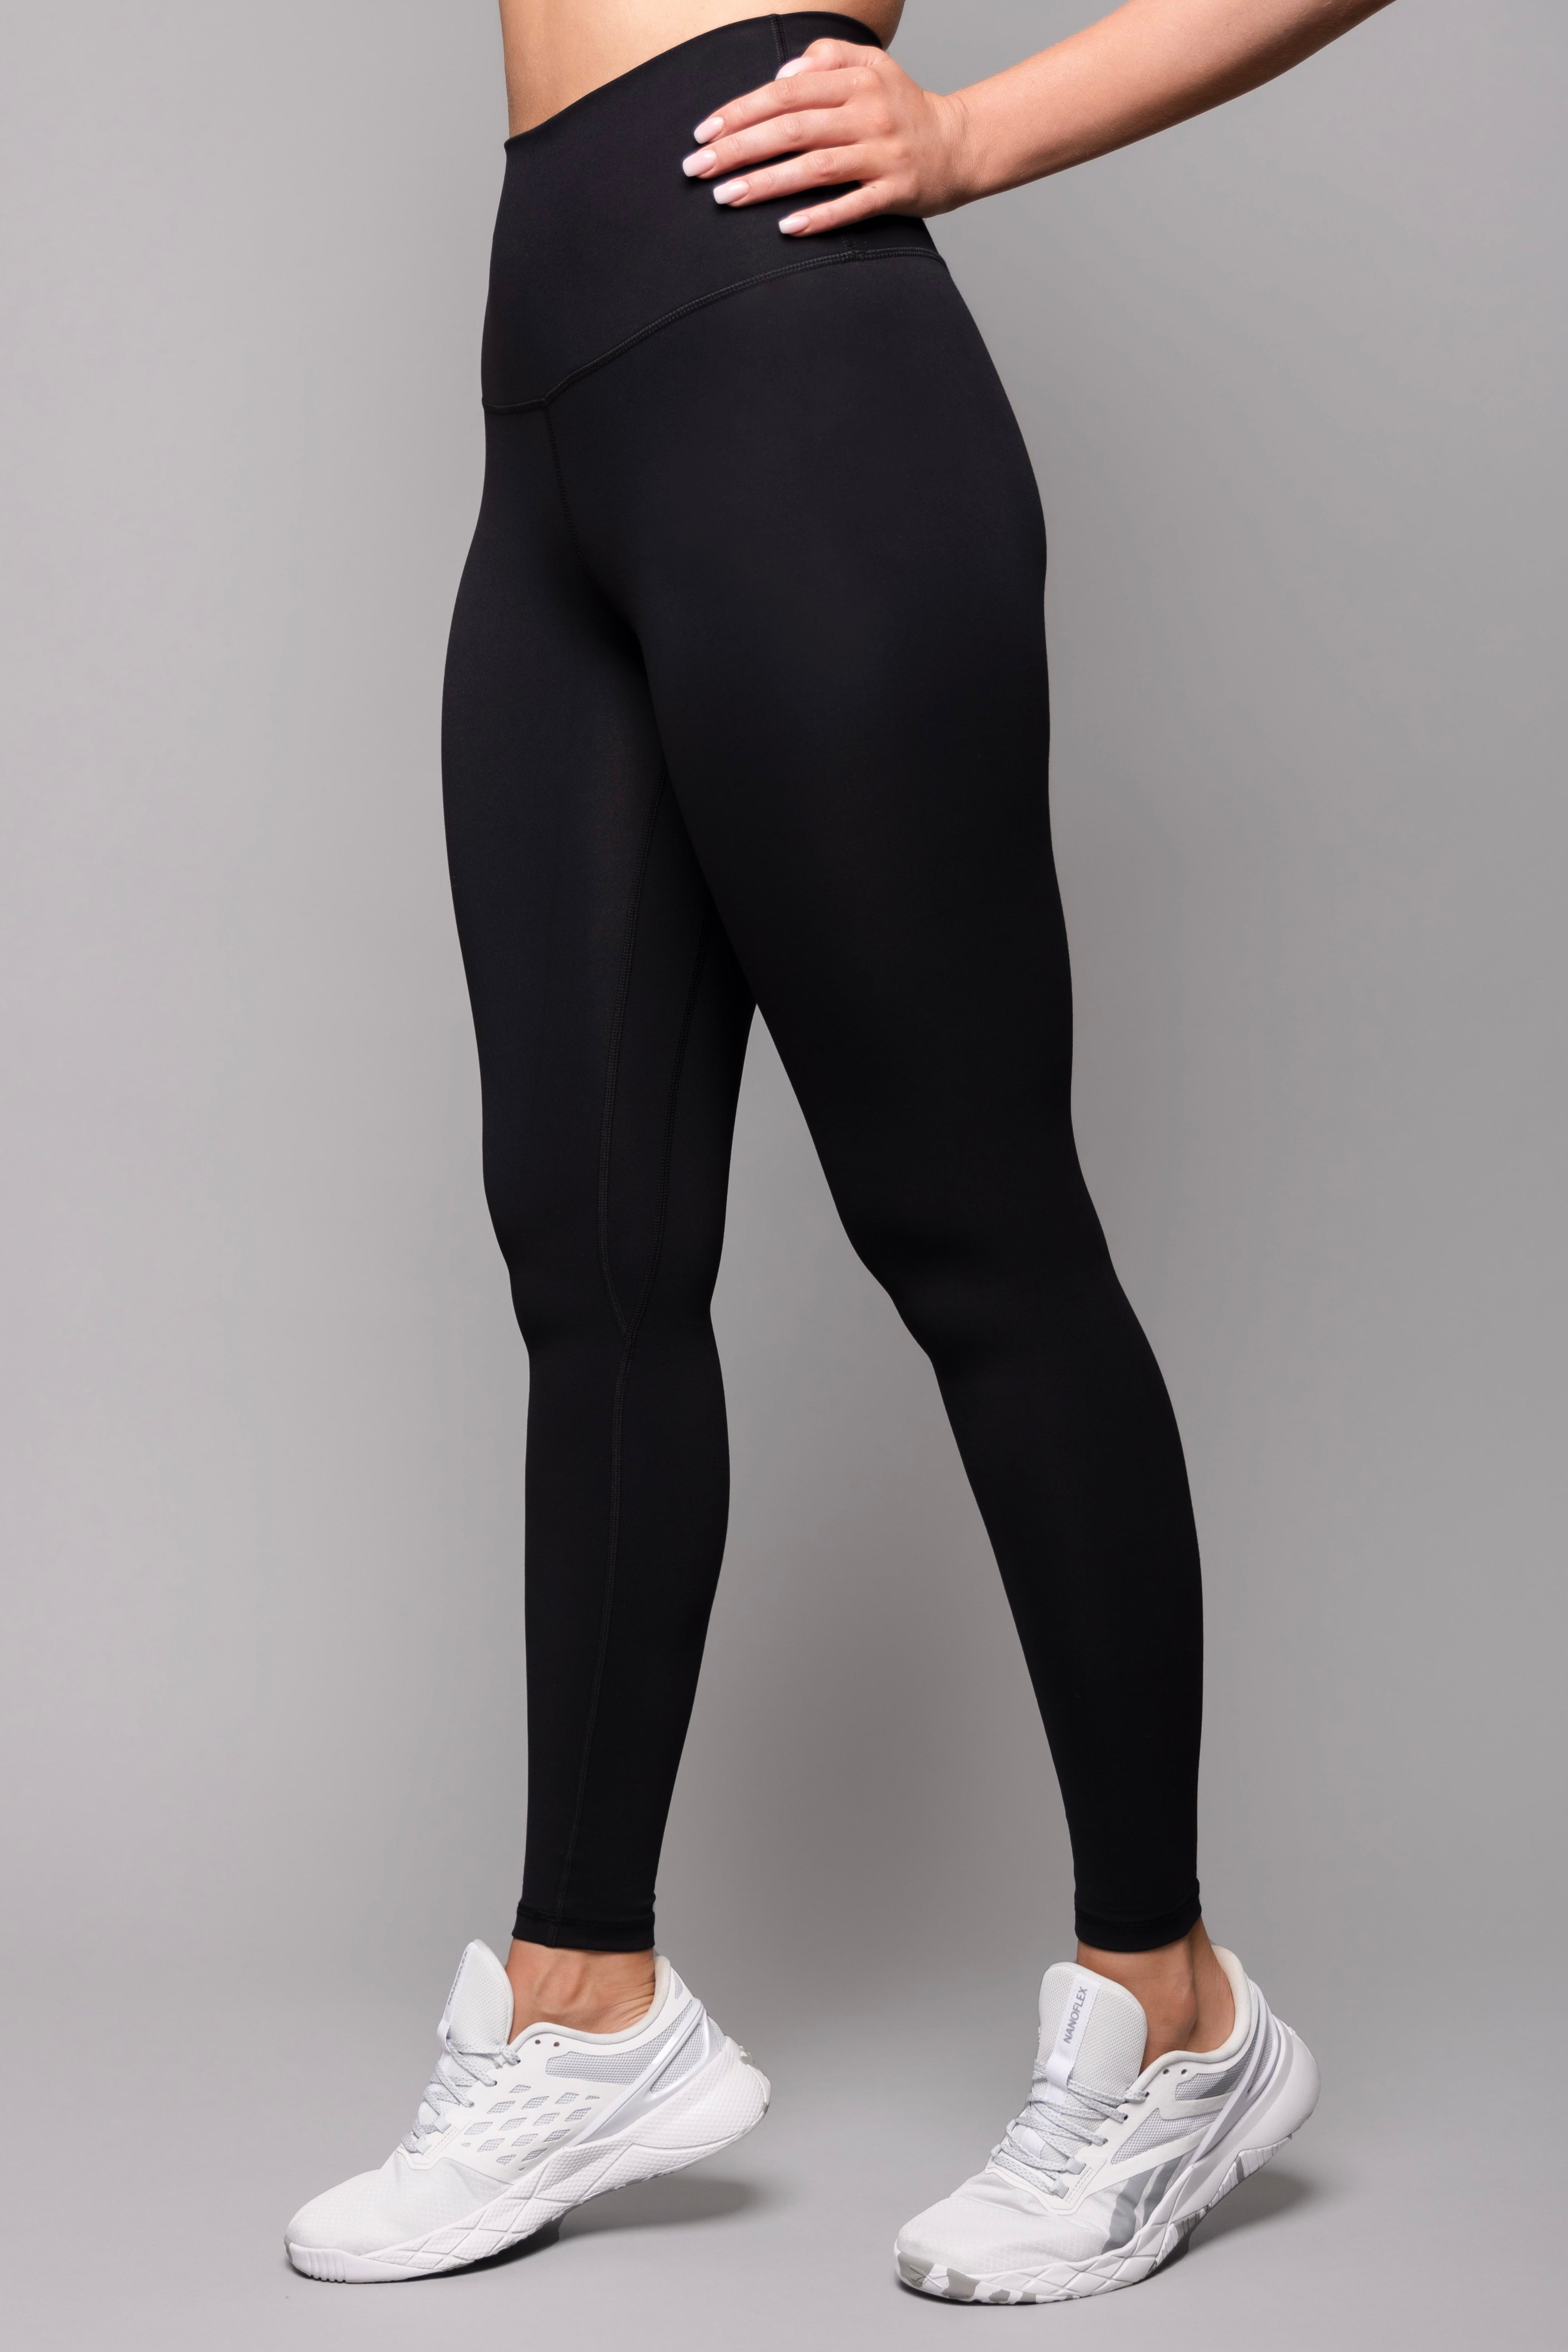 LUXE BLACK EXTRA HIGH WAISTED TIGHTS - DTL Sport